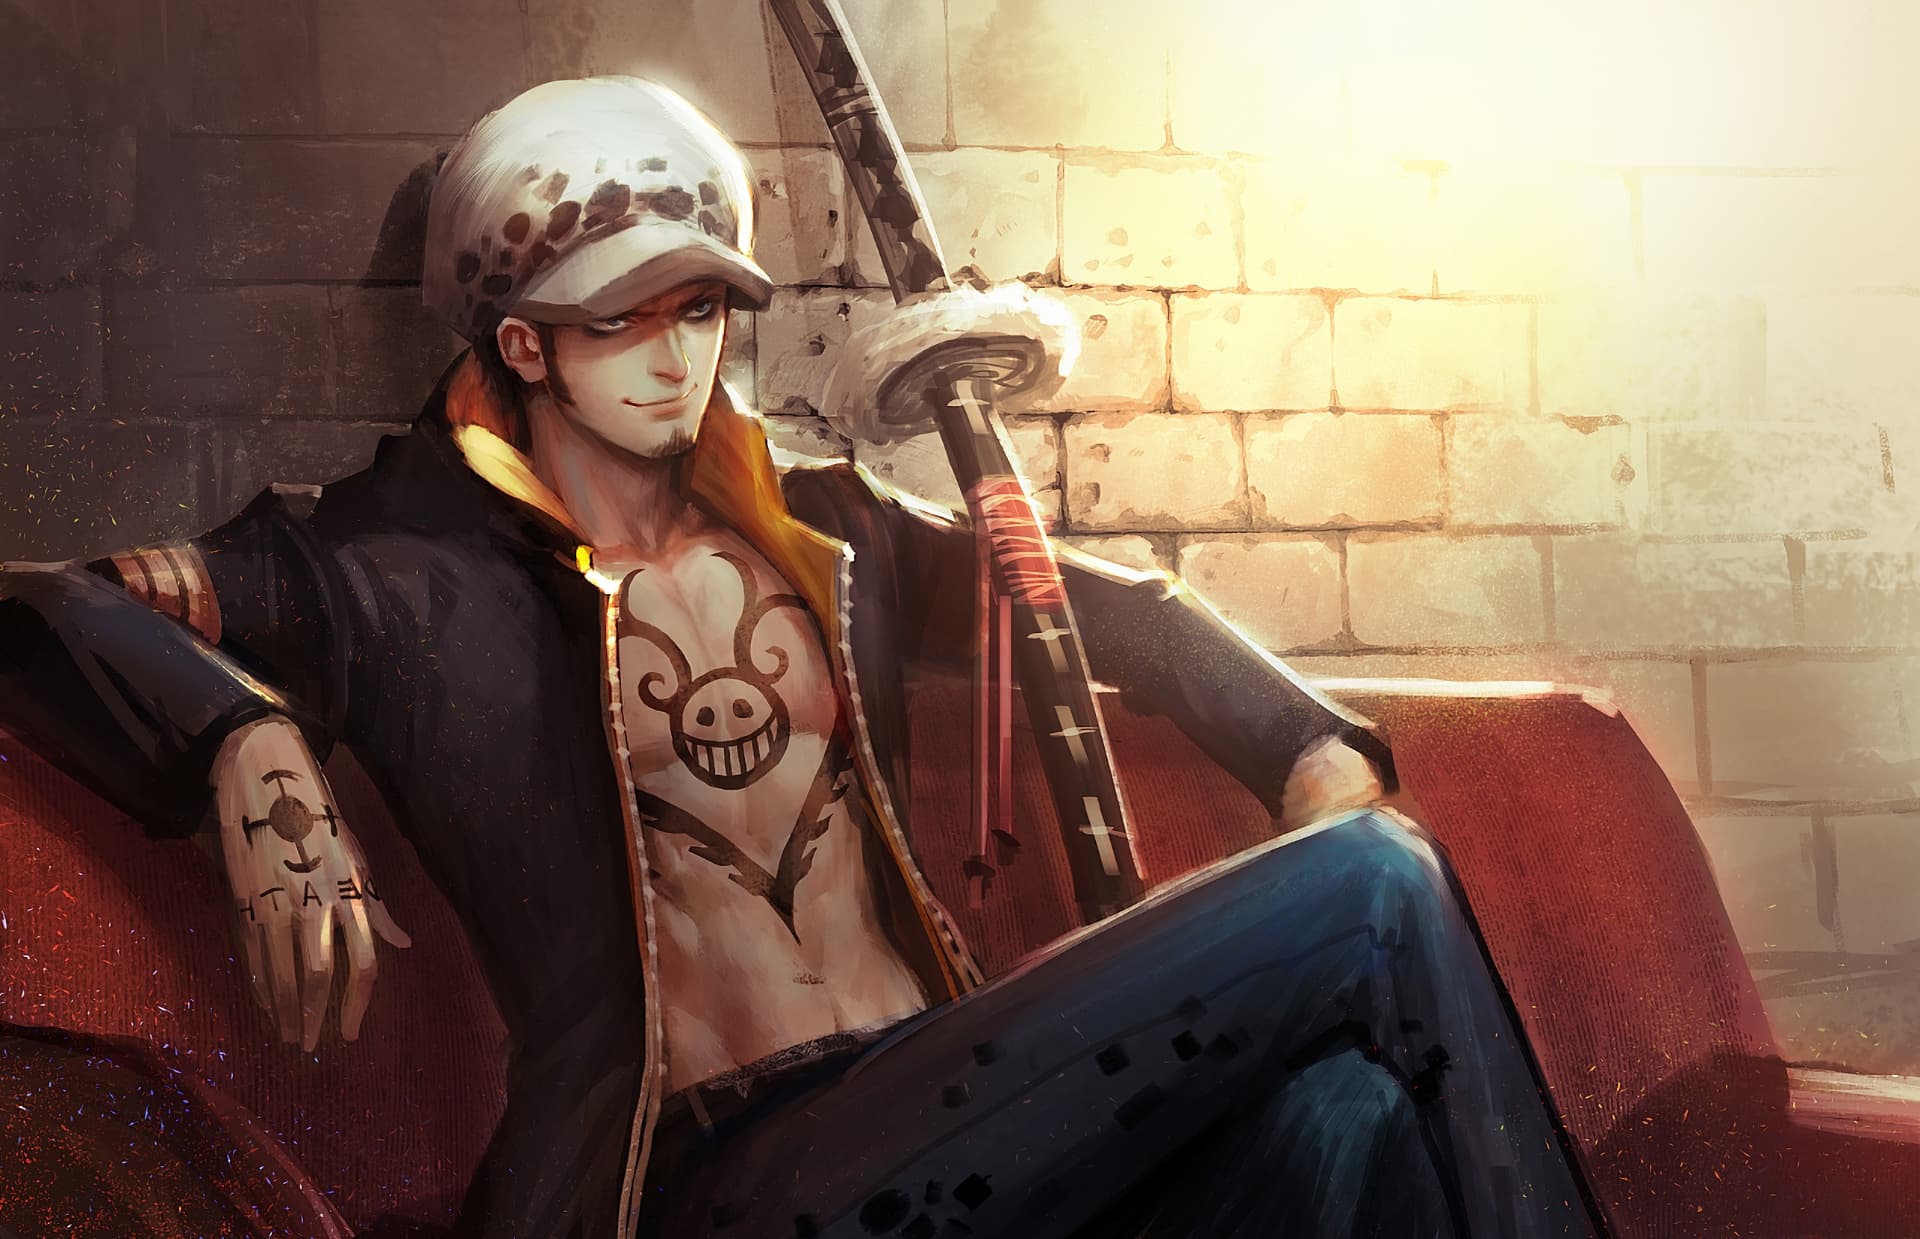 Law One Piece Wallpapers - Wallpaper Cave